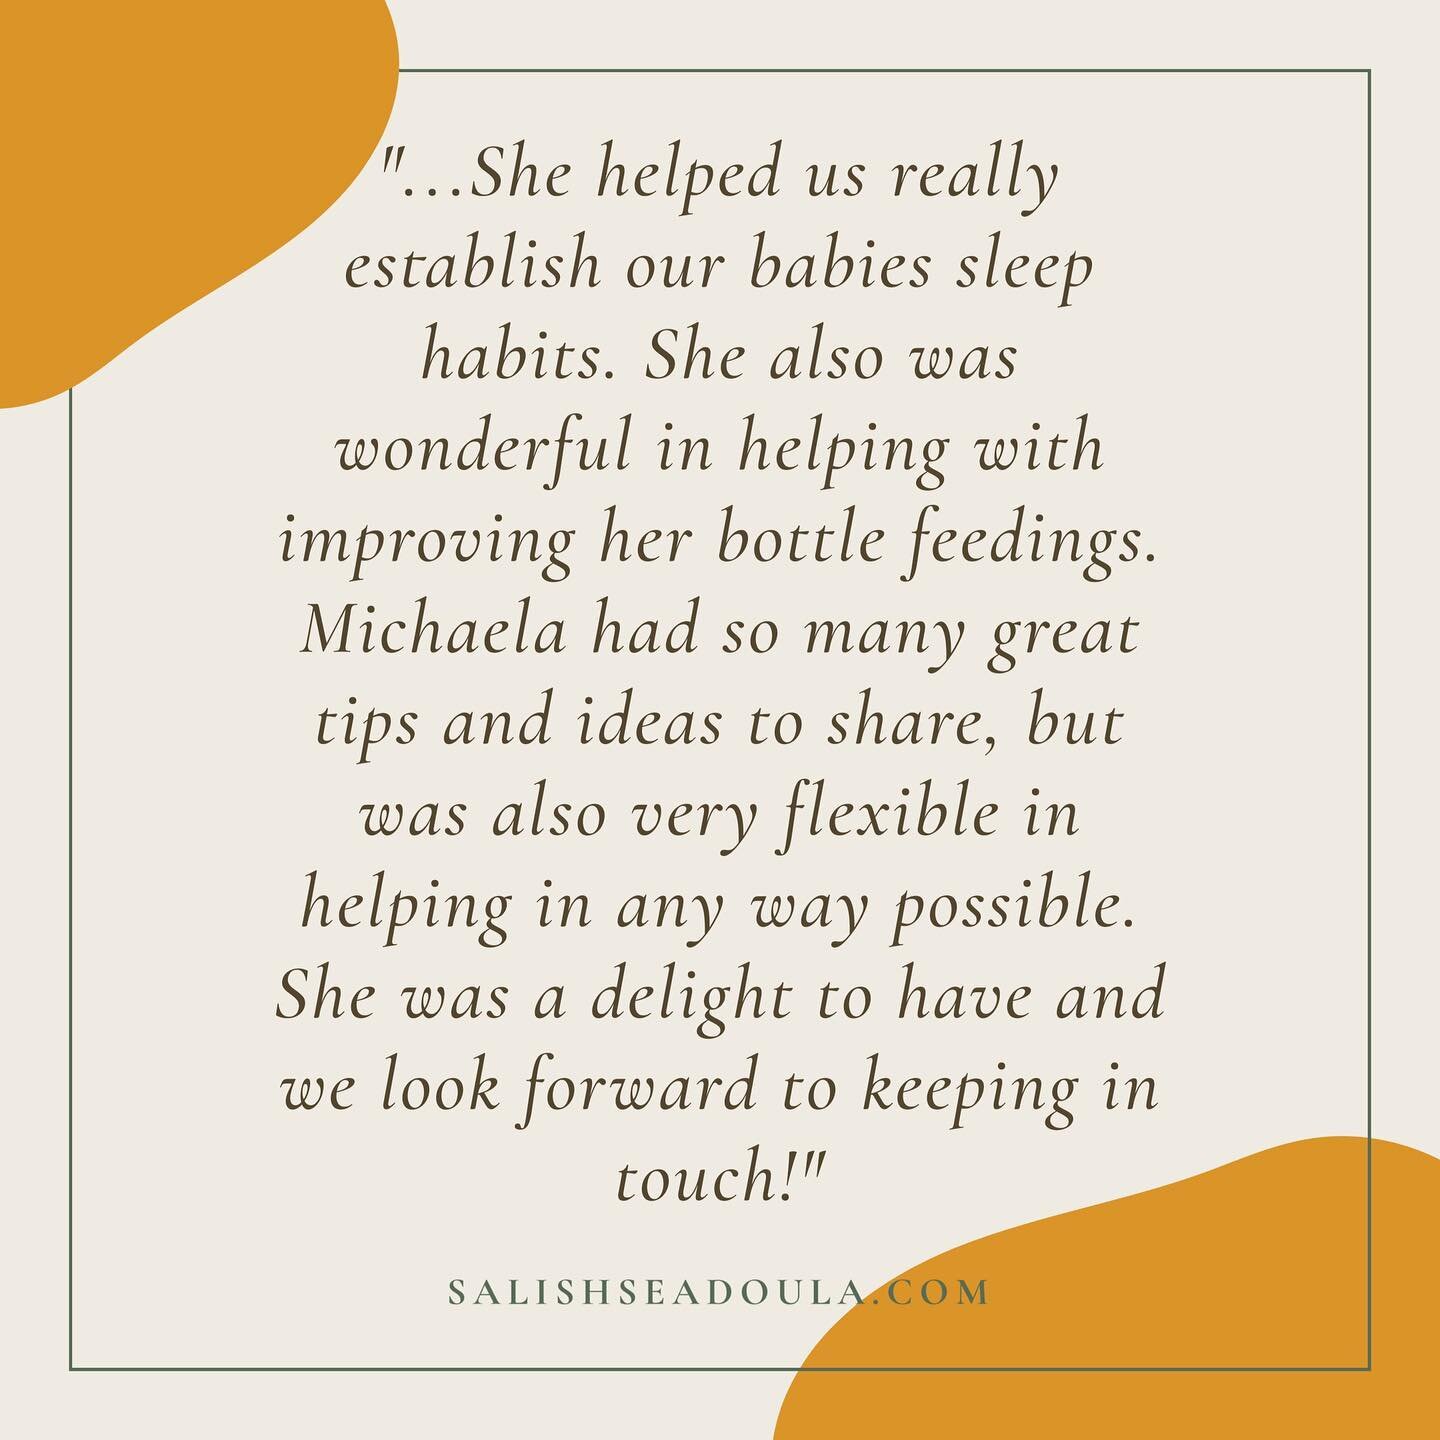 New blog post today about overnight doula services! I have had so many clients absolutely love this service I offer. It is a much needed respite from the sleepless newborn nights. Check out the blog post on my website!
Kind words from a recent client